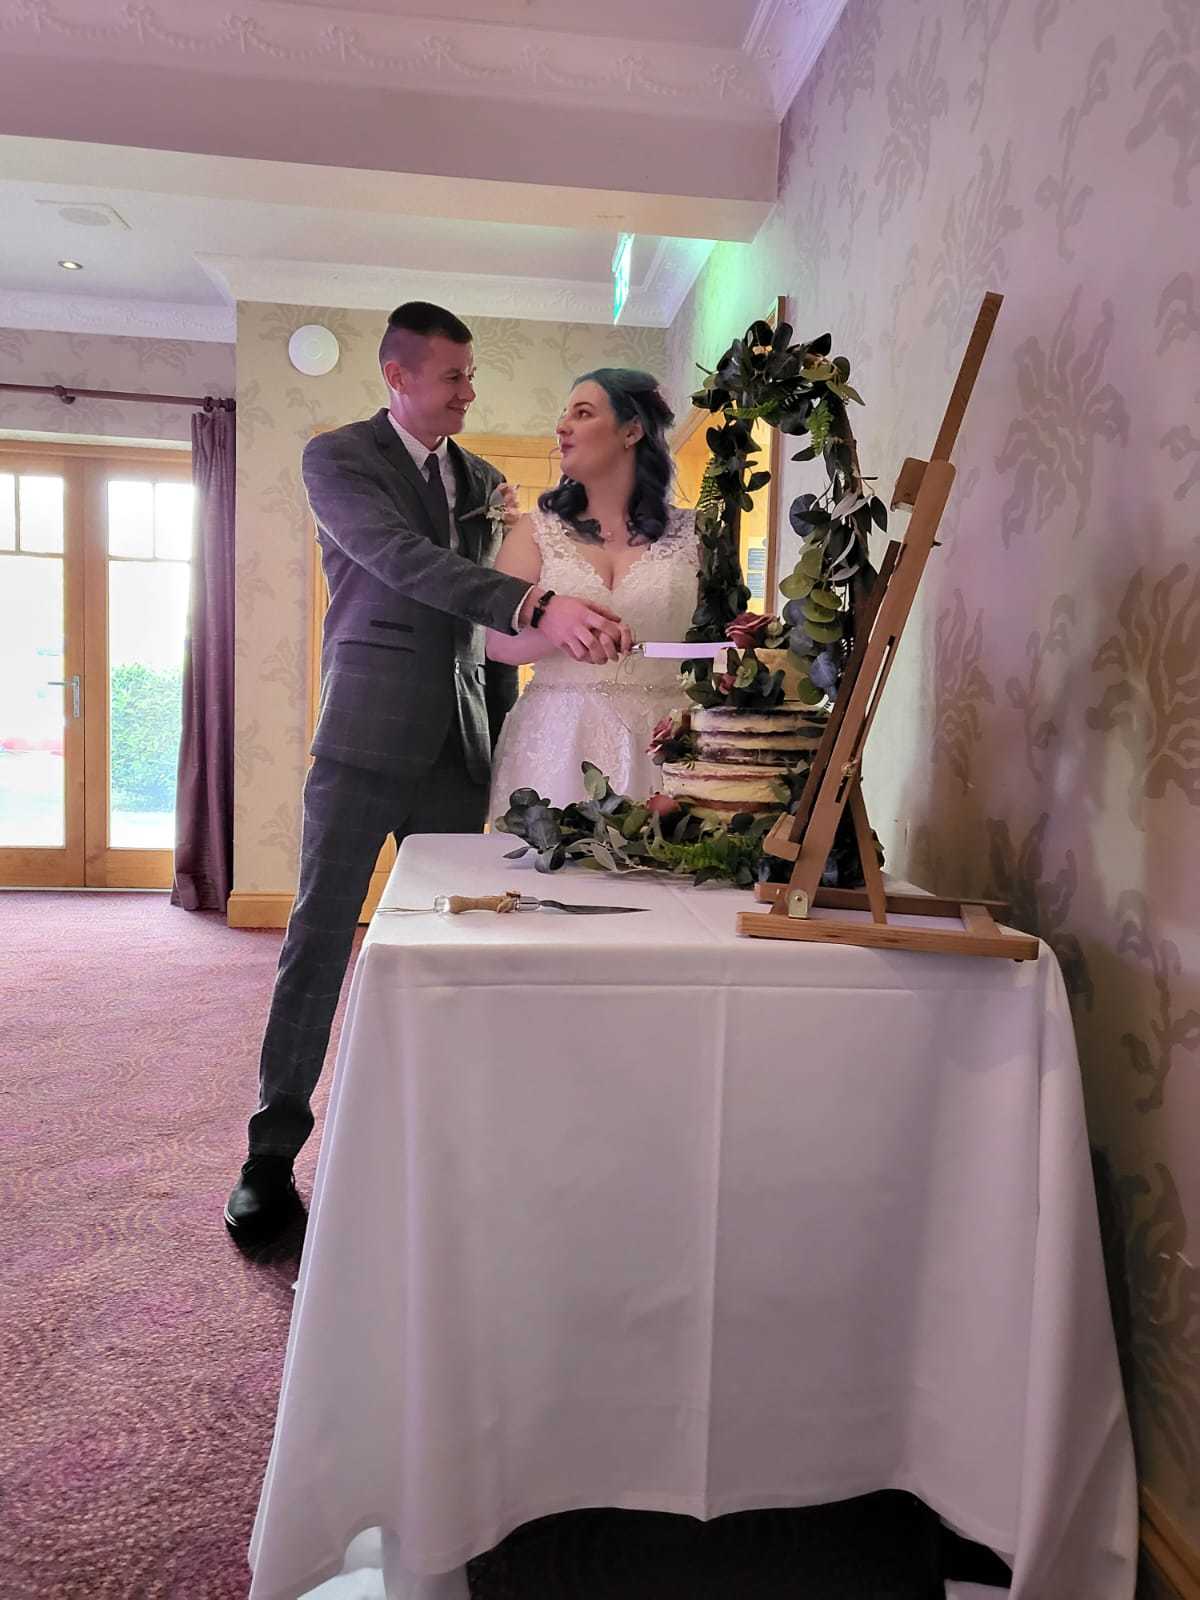 The new Mr and Mrs Povey-Dunn cutting their homemade wedding cake